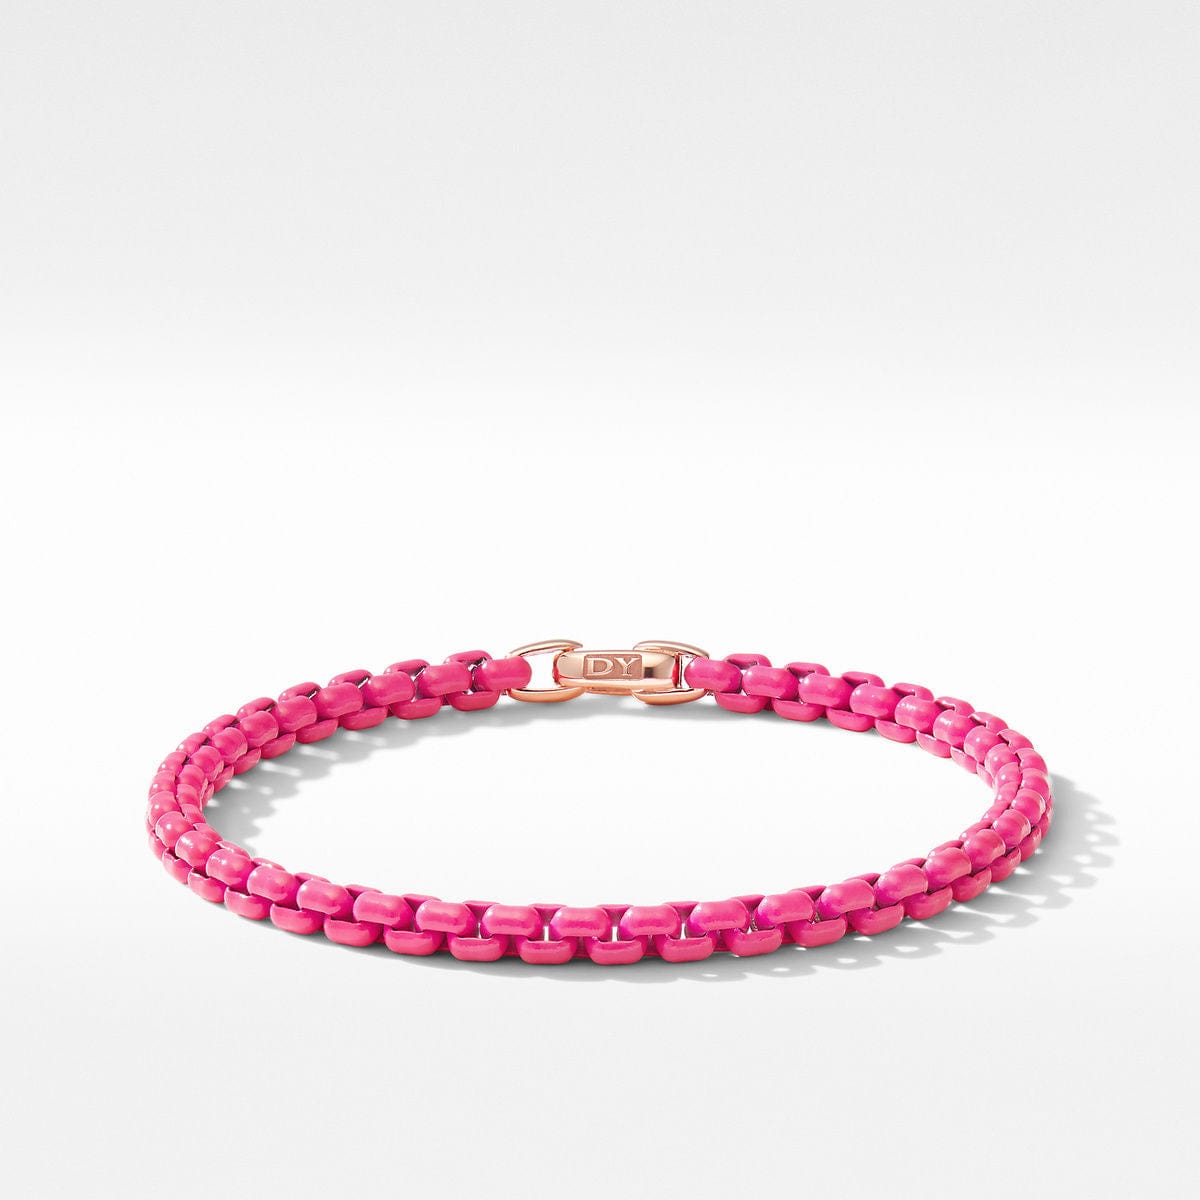 DY Bel Aire Chain Bracelet in Hot Pink with 14K Rose Gold Accent, Sterling Silver, Long's Jewelers